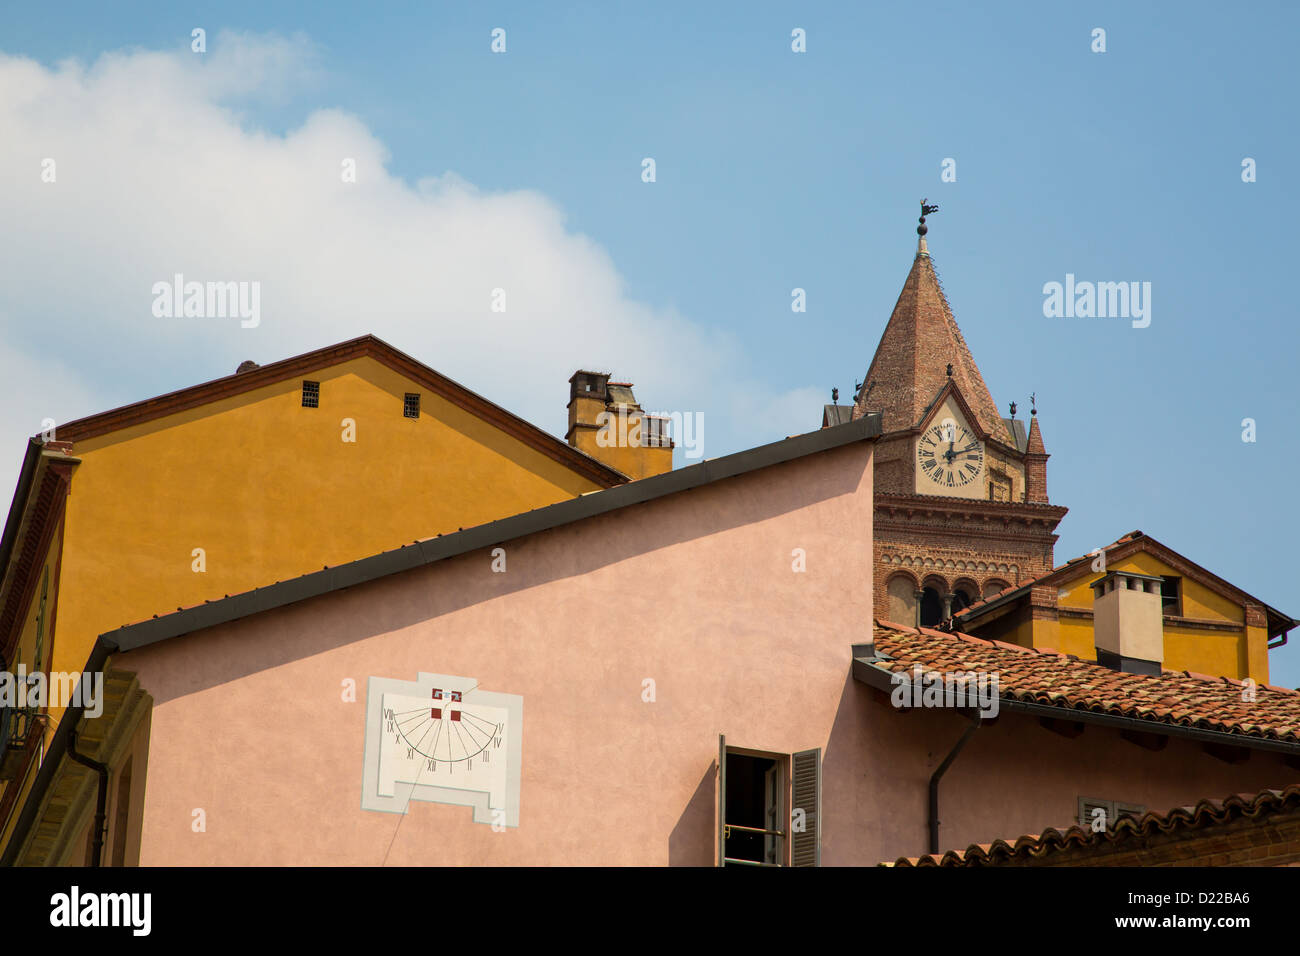 Buildings in Alba showing various architecture styles including the tower of Chiesa di San Domenica. Piedmont region in Italy Stock Photo